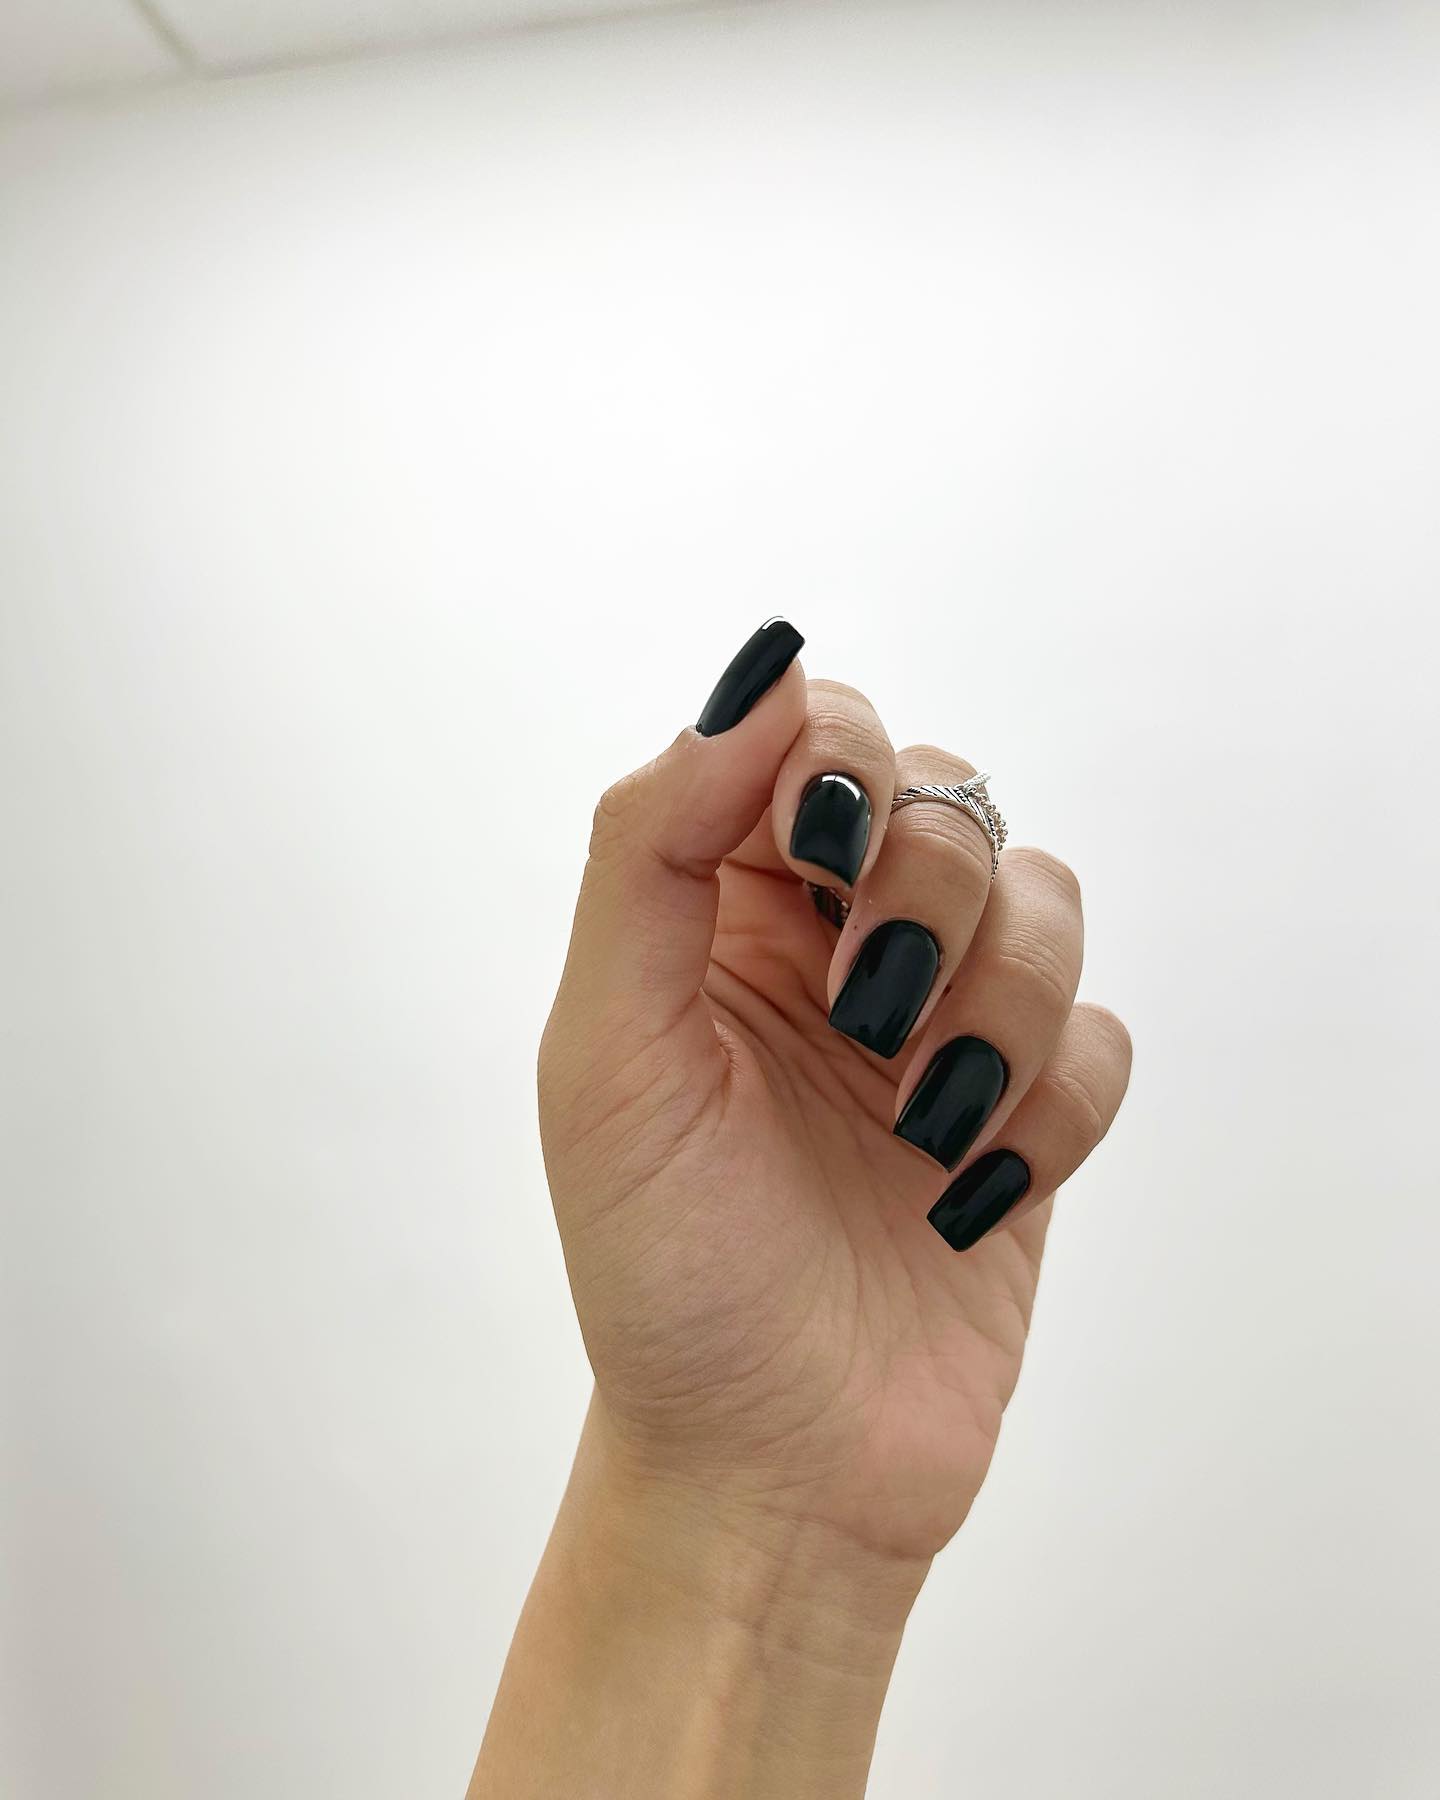 Best Occasions to Wear Black Nails